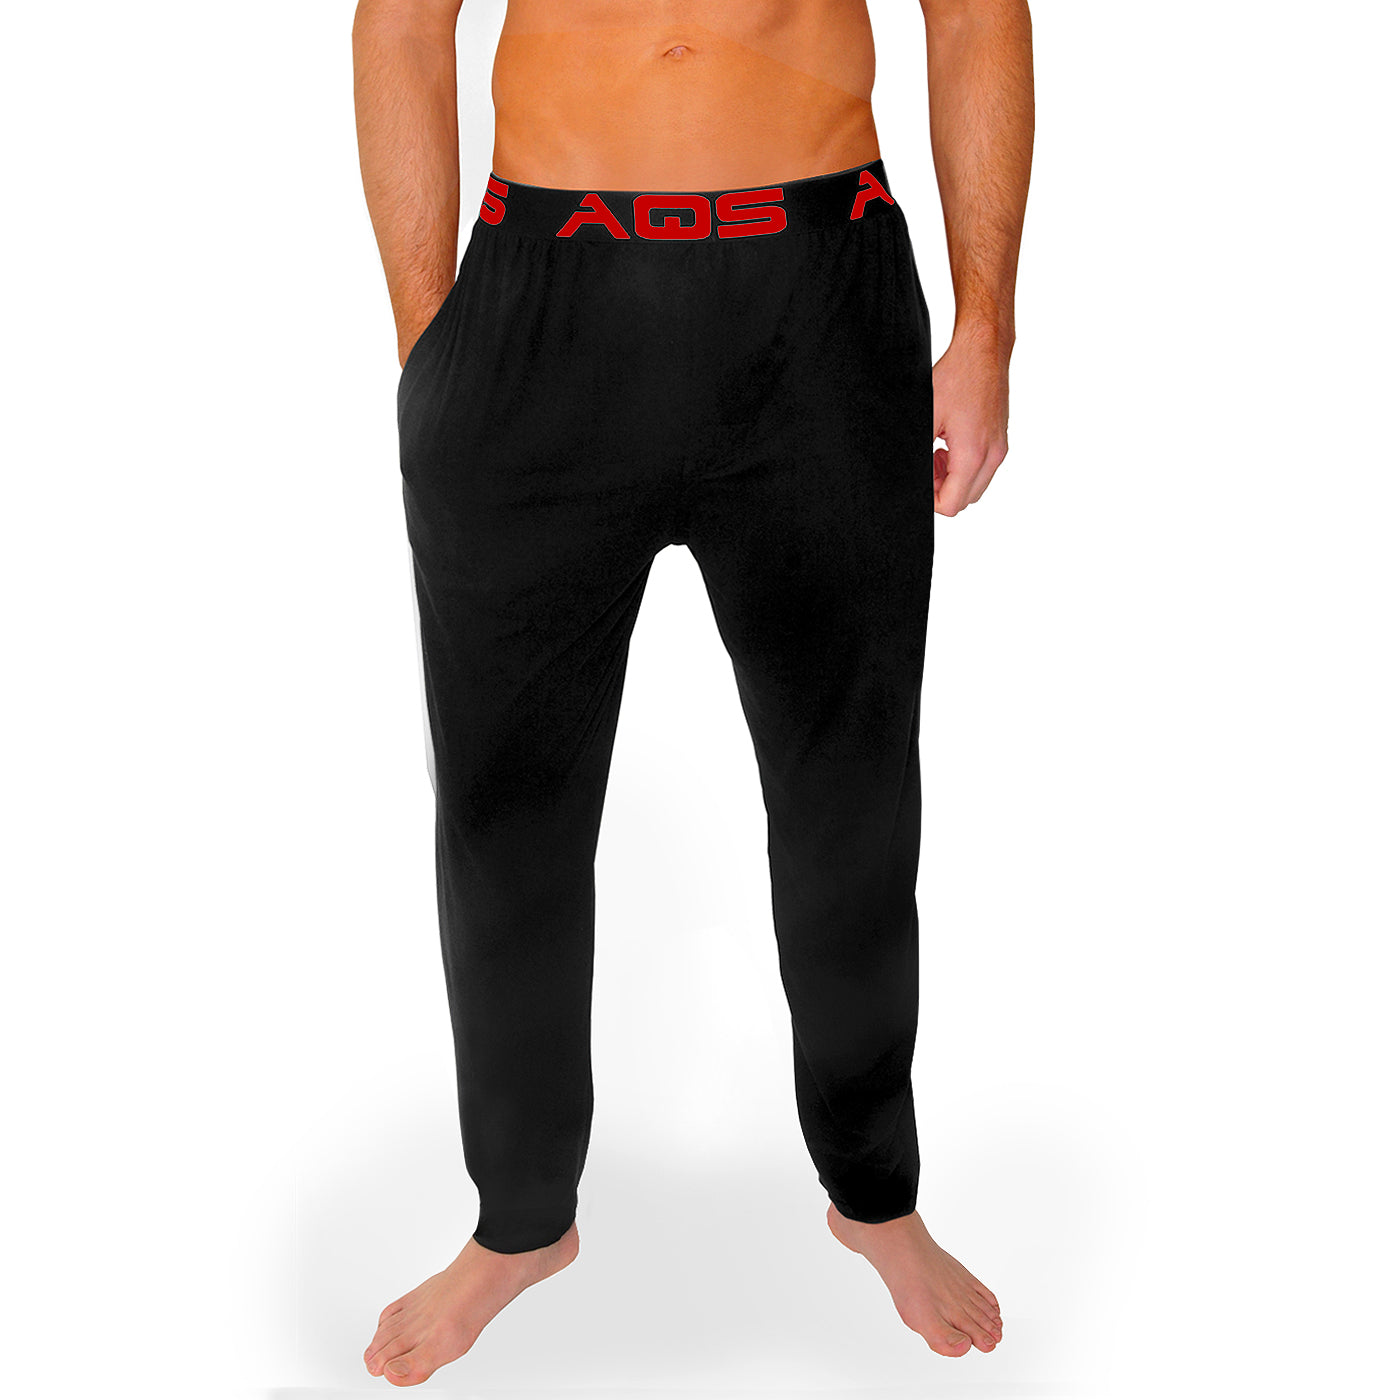 Aqs Super Soft Lounge Pants In Black And Red